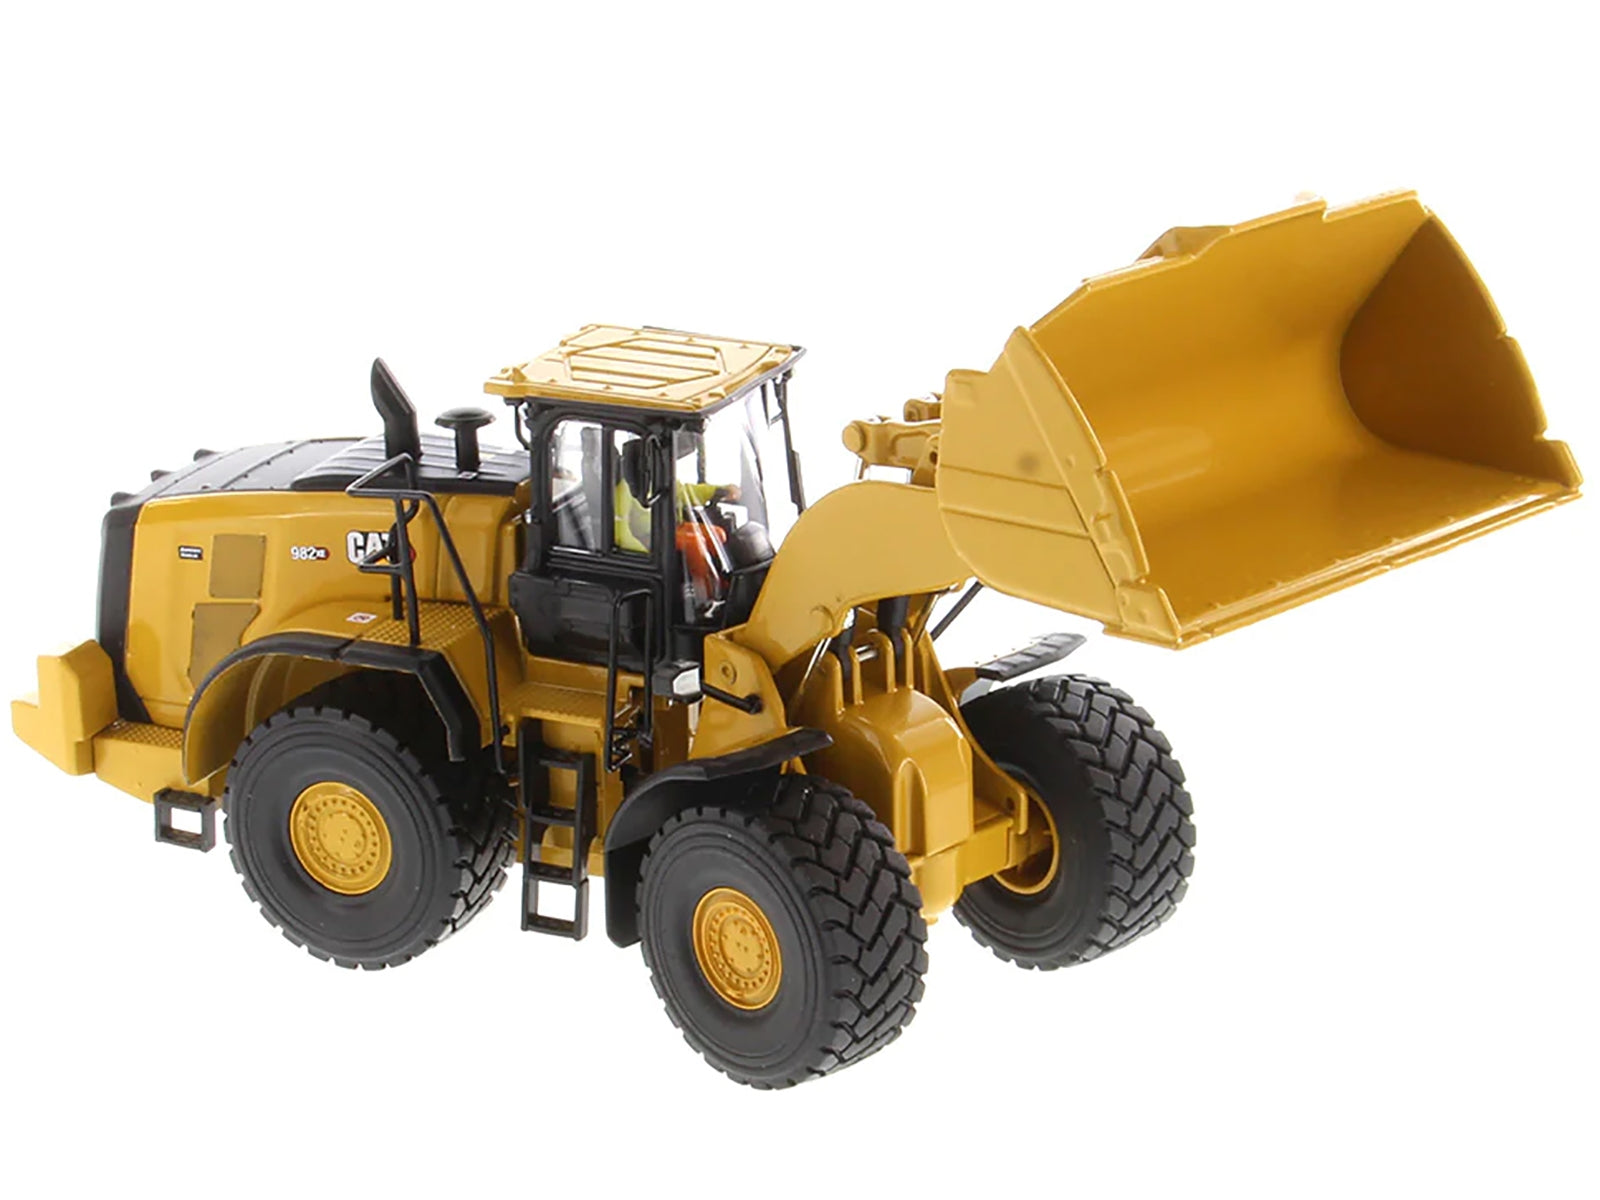 CAT Caterpillar 982 XE Wheel Loader Yellow with Operator "High Line Series" 1/50 Diecast Model by Diecast Masters Diecast Masters